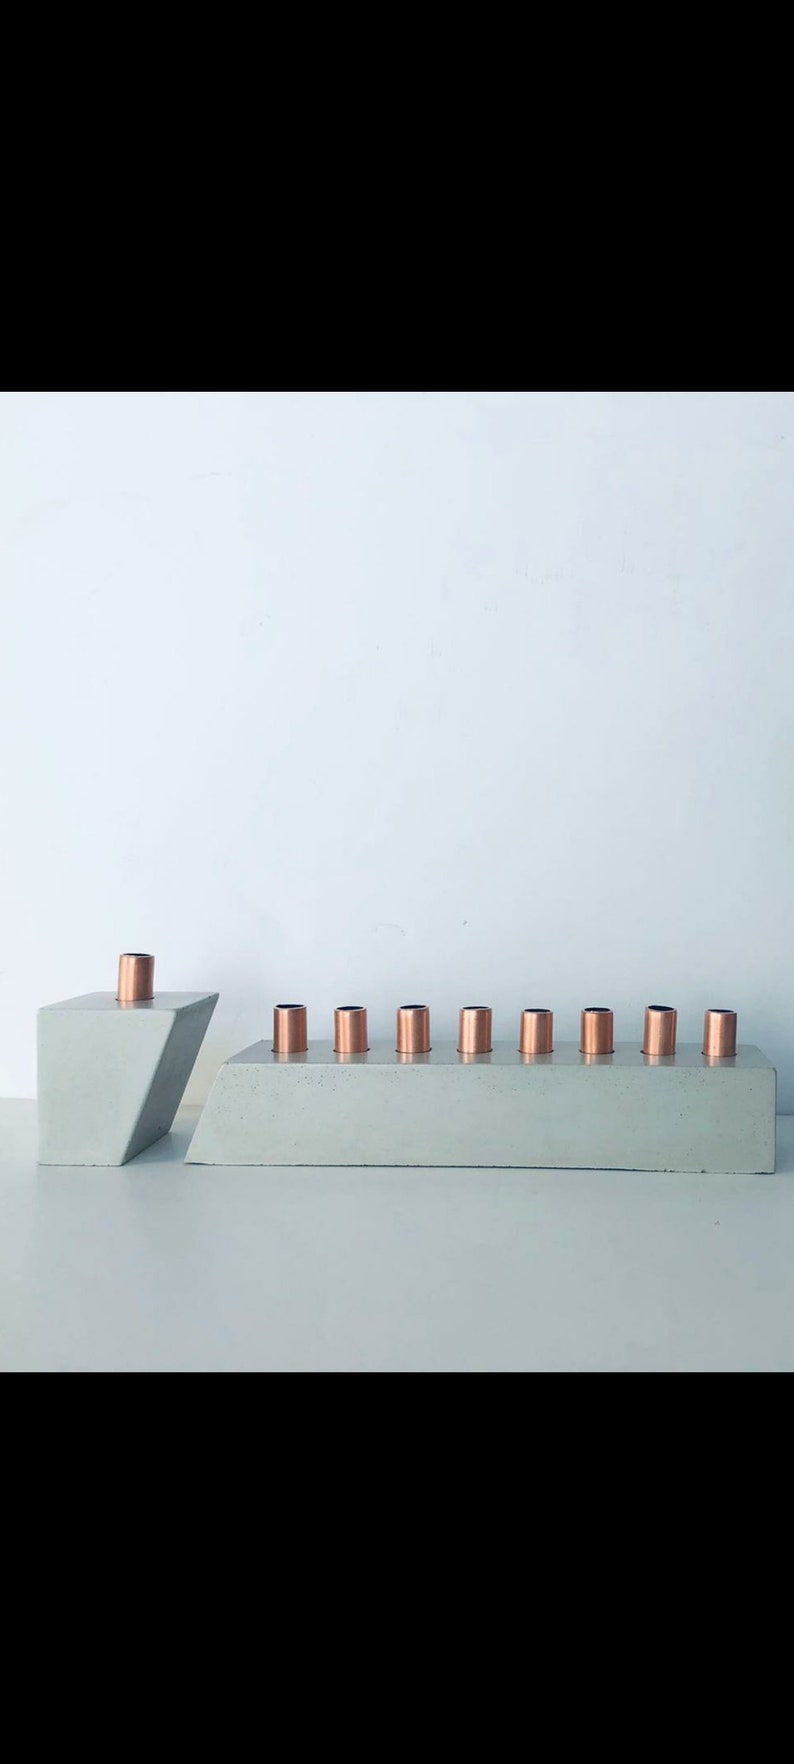 Menorah concrete Hanukkiah is meticulously handcrafted branches are made out of concrete and use candles and alike Hanukkah modern gifts image 5